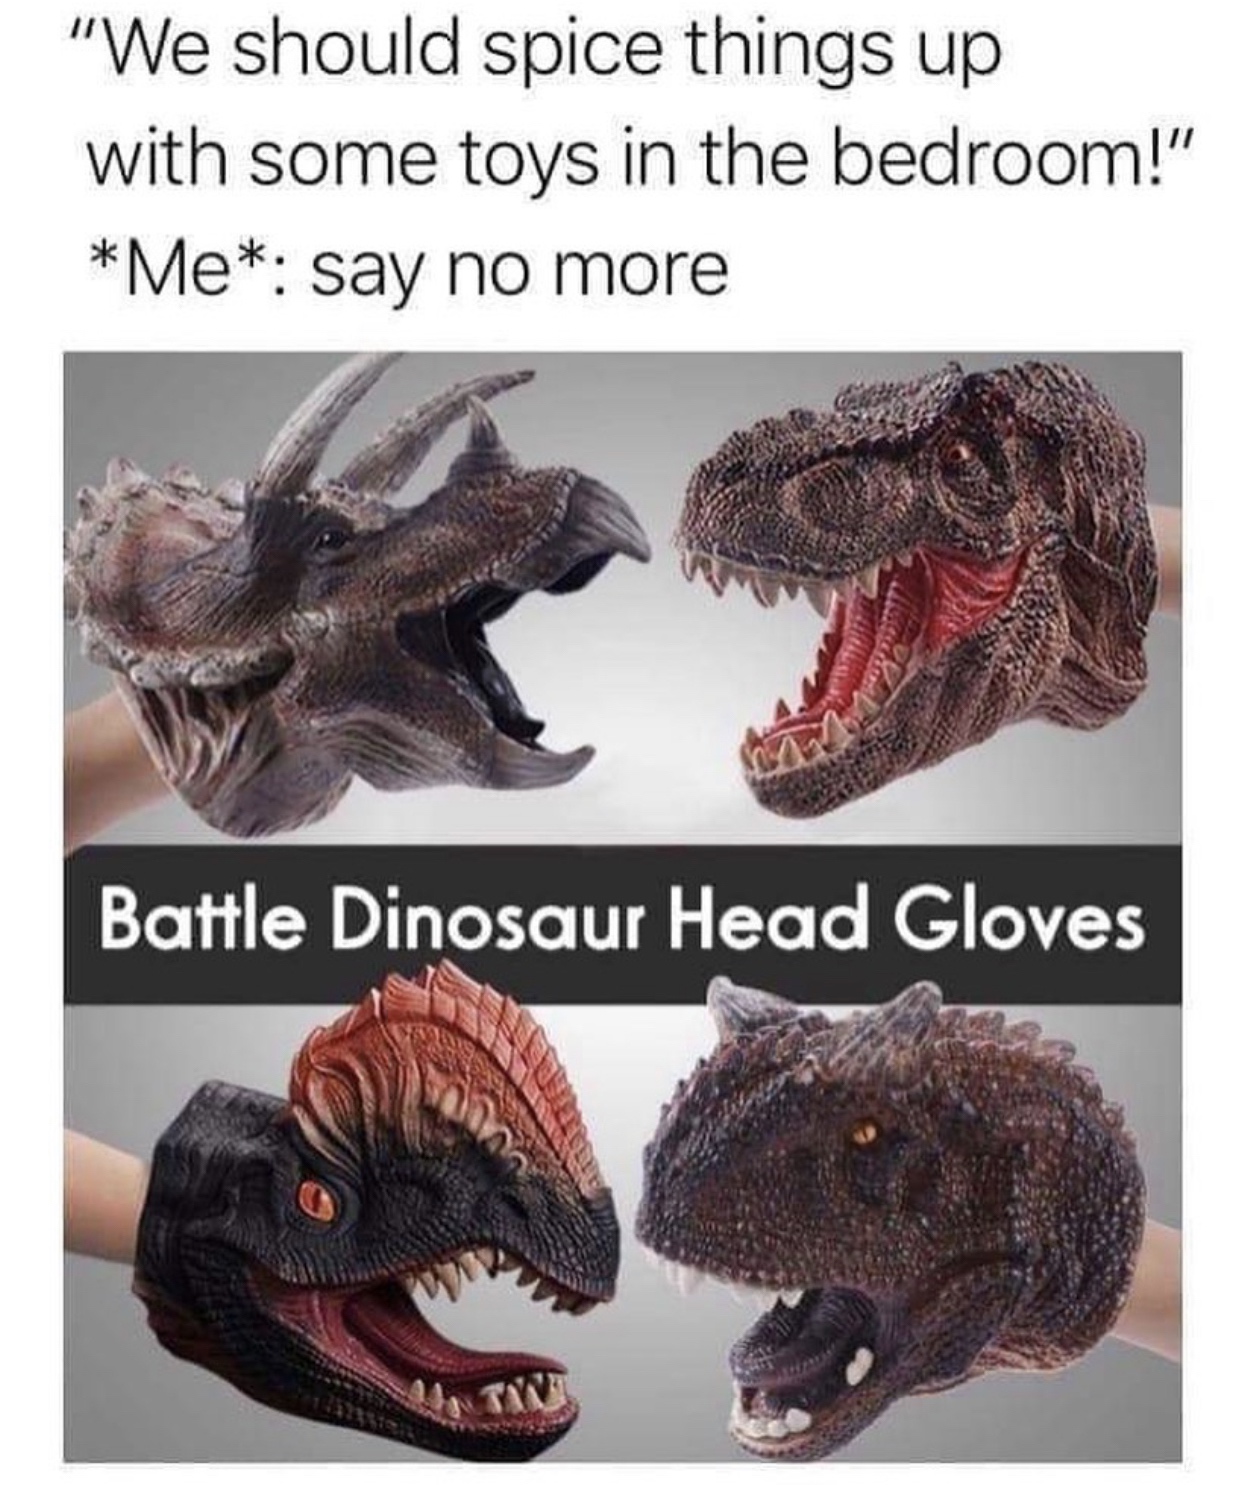 dinosaur battle gloves - "We should spice things up with some toys in the bedroom!" Me say no more Battle Dinosaur Head Gloves 44 Tan